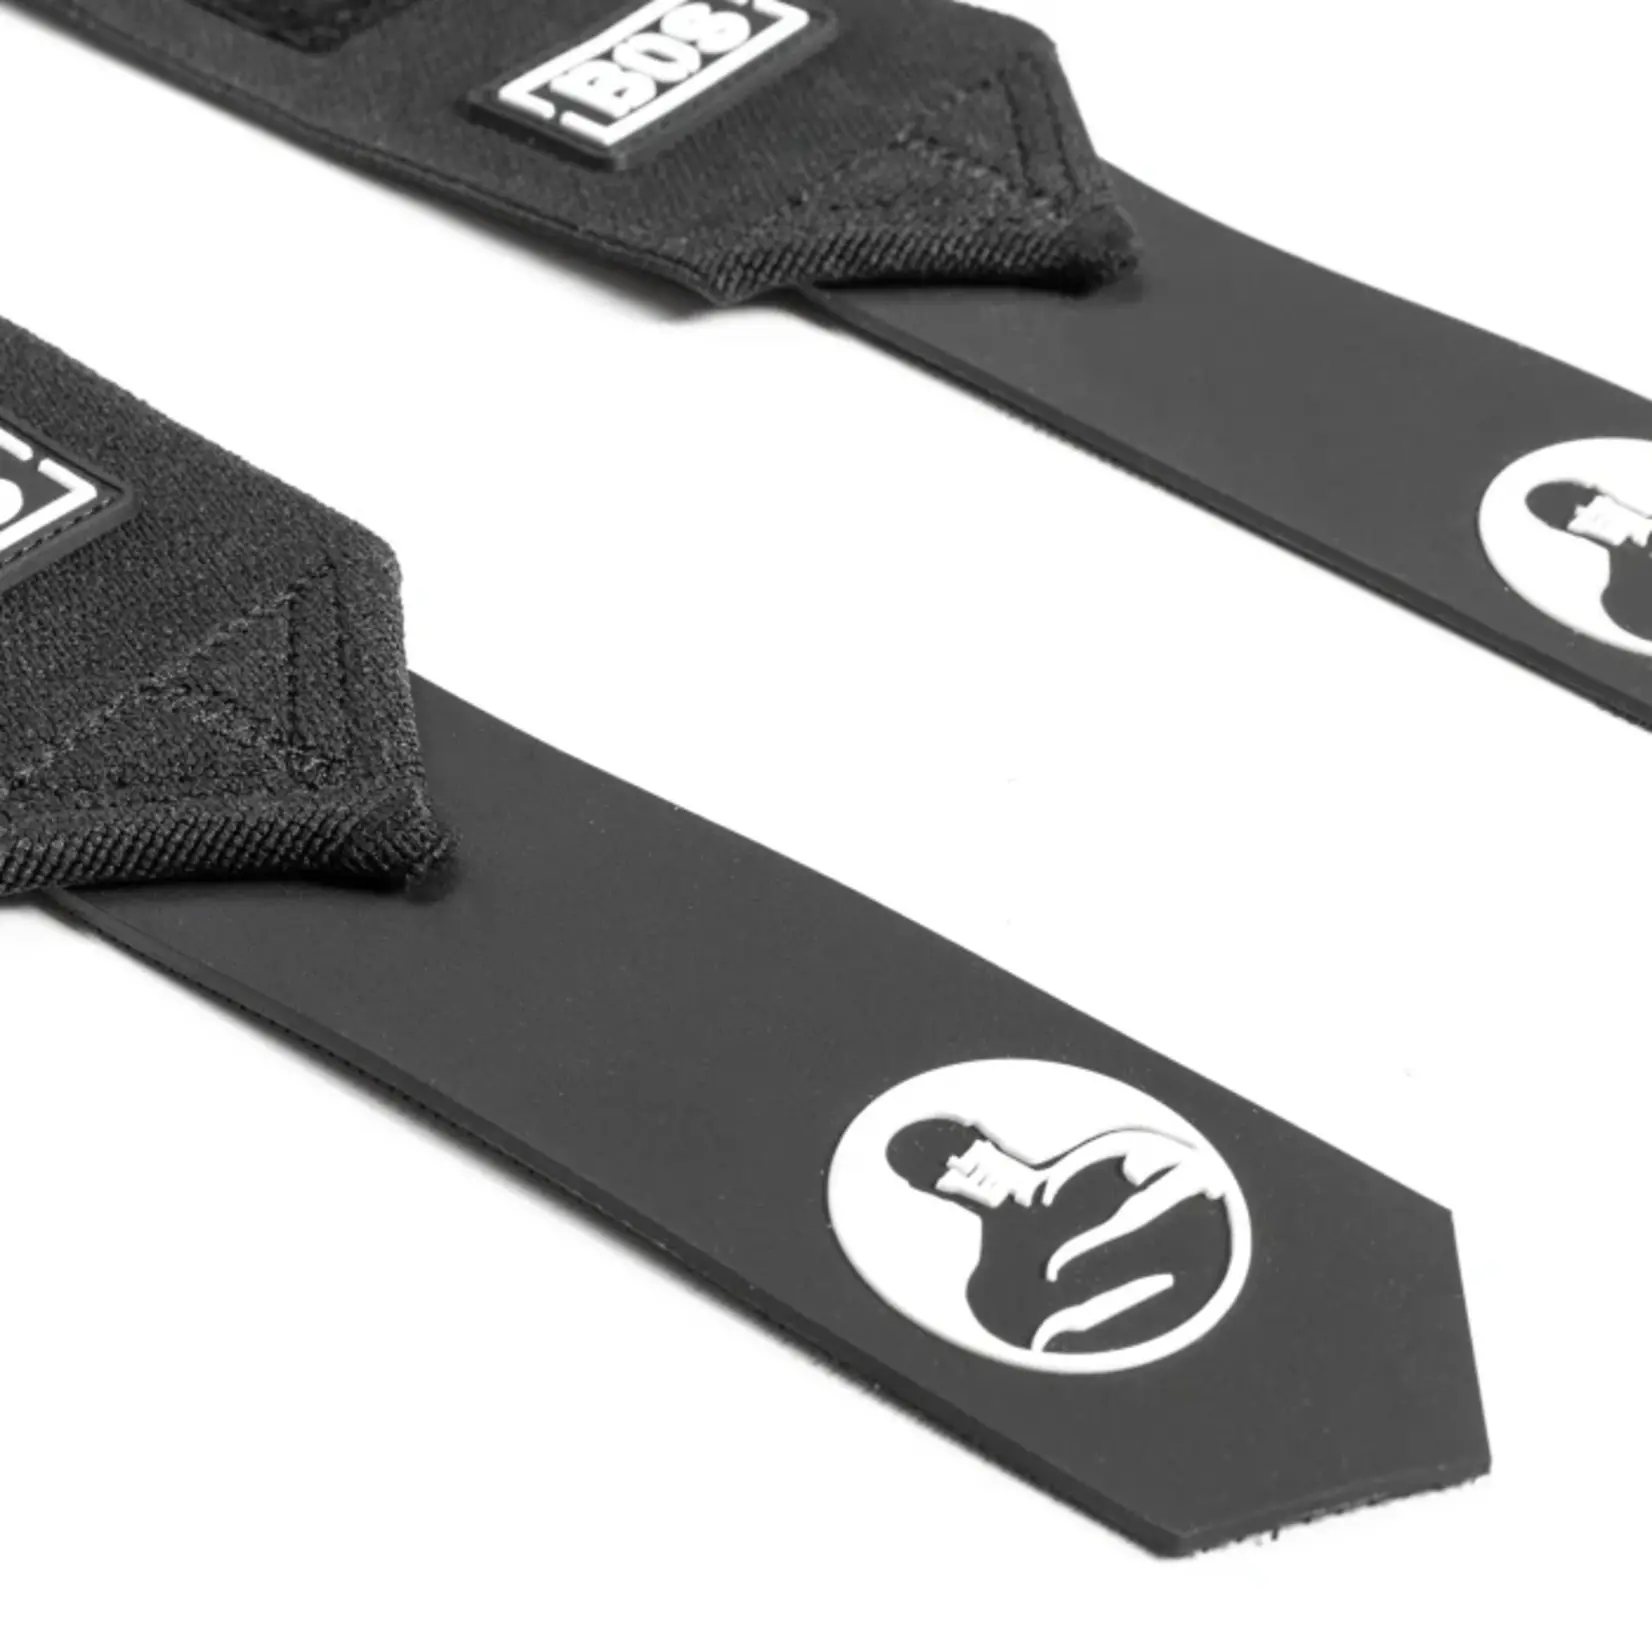 Bells Of Steel BOS Competition Mighty Wrist Wraps